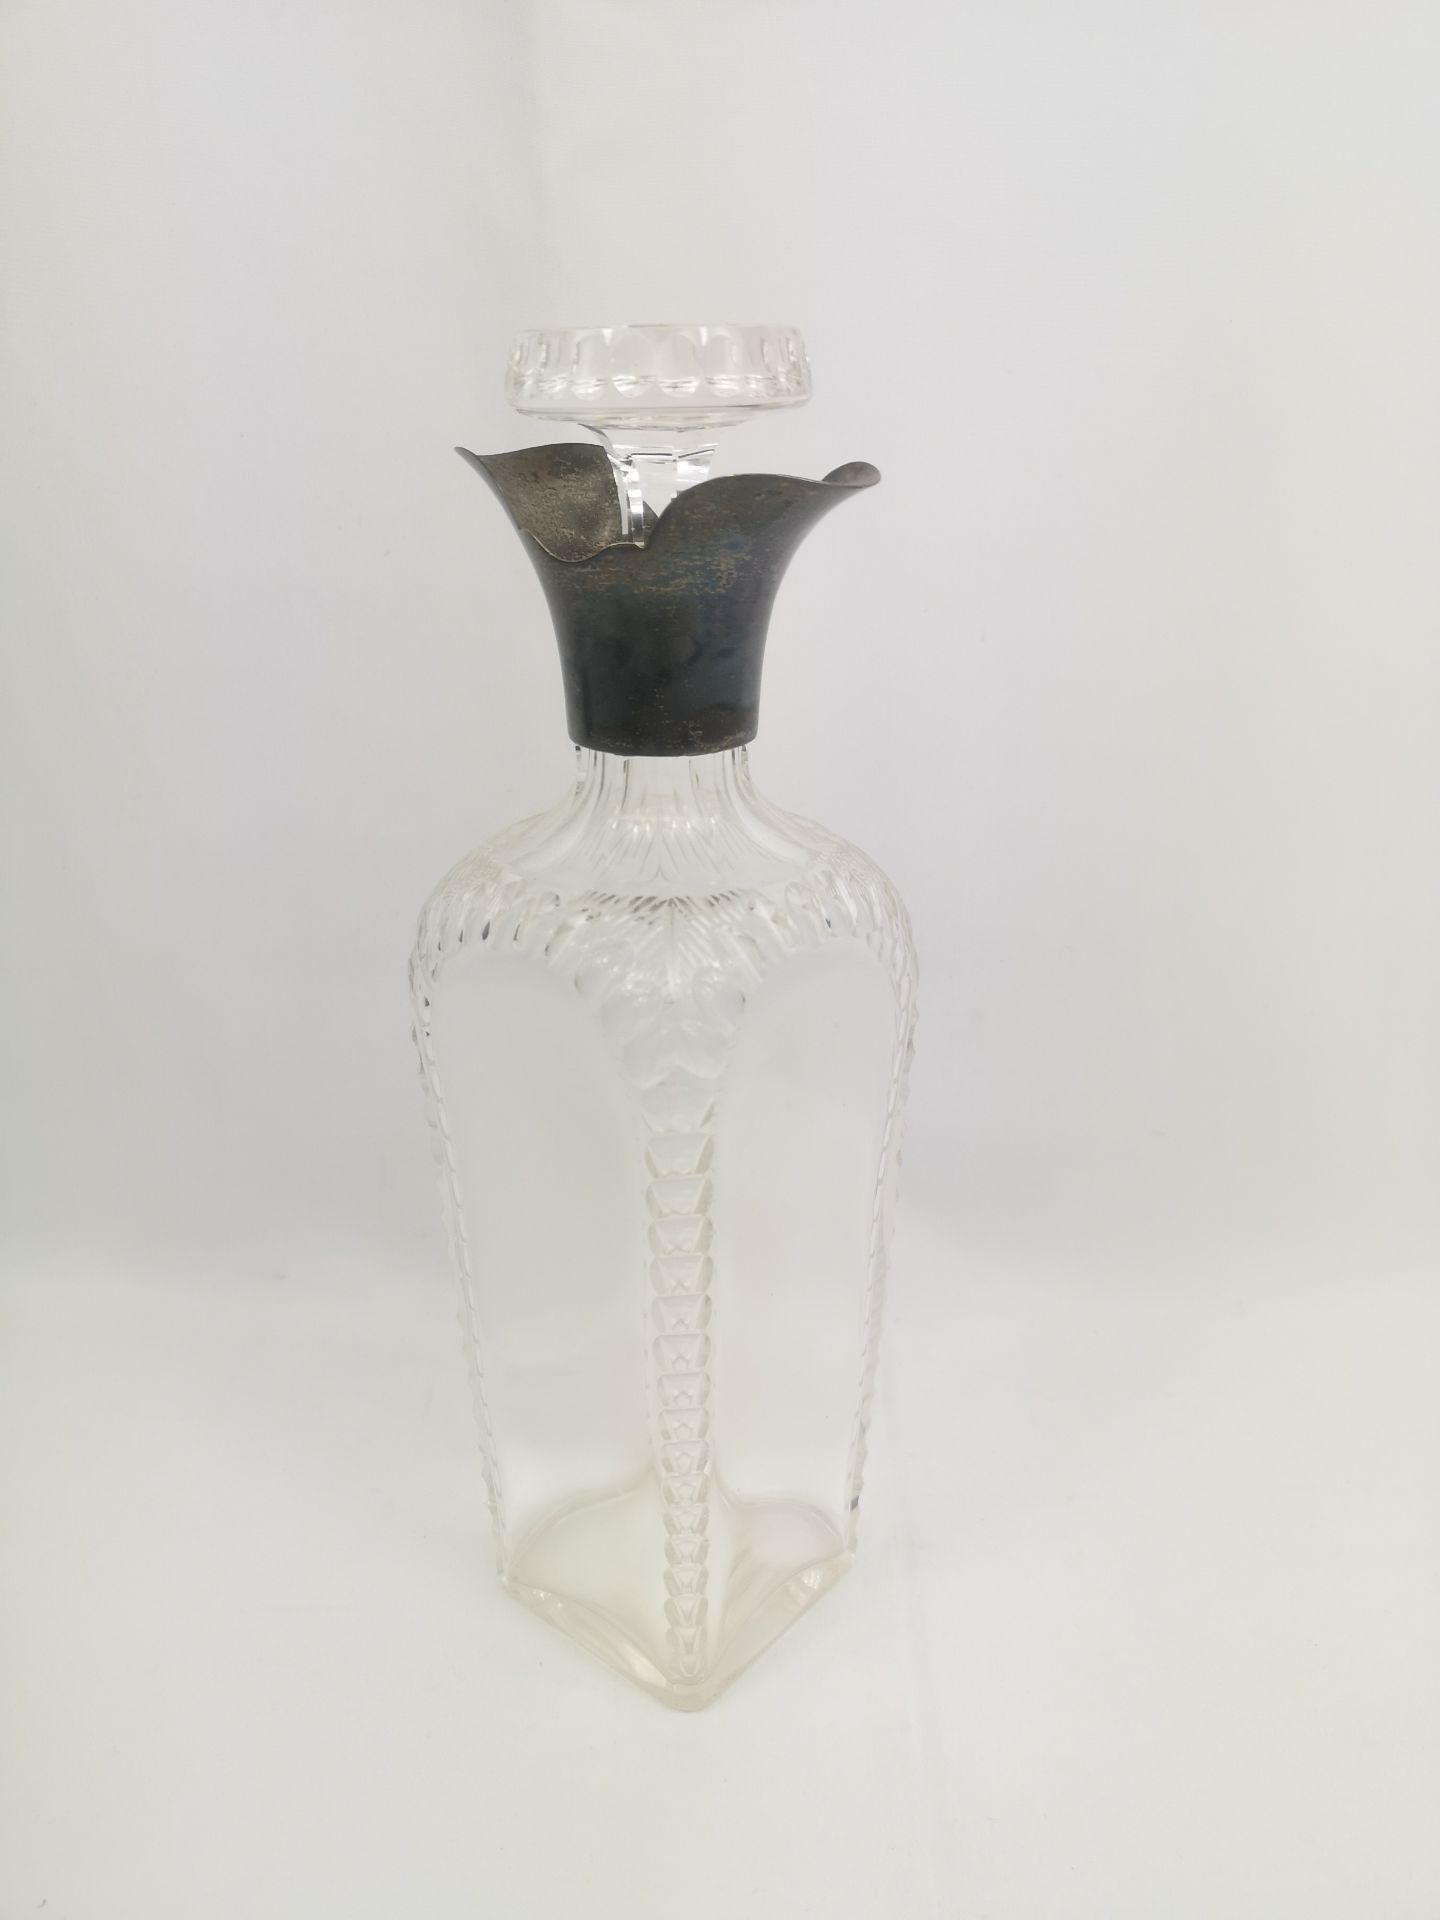 Cut glass decanter with silver collar - Image 2 of 2